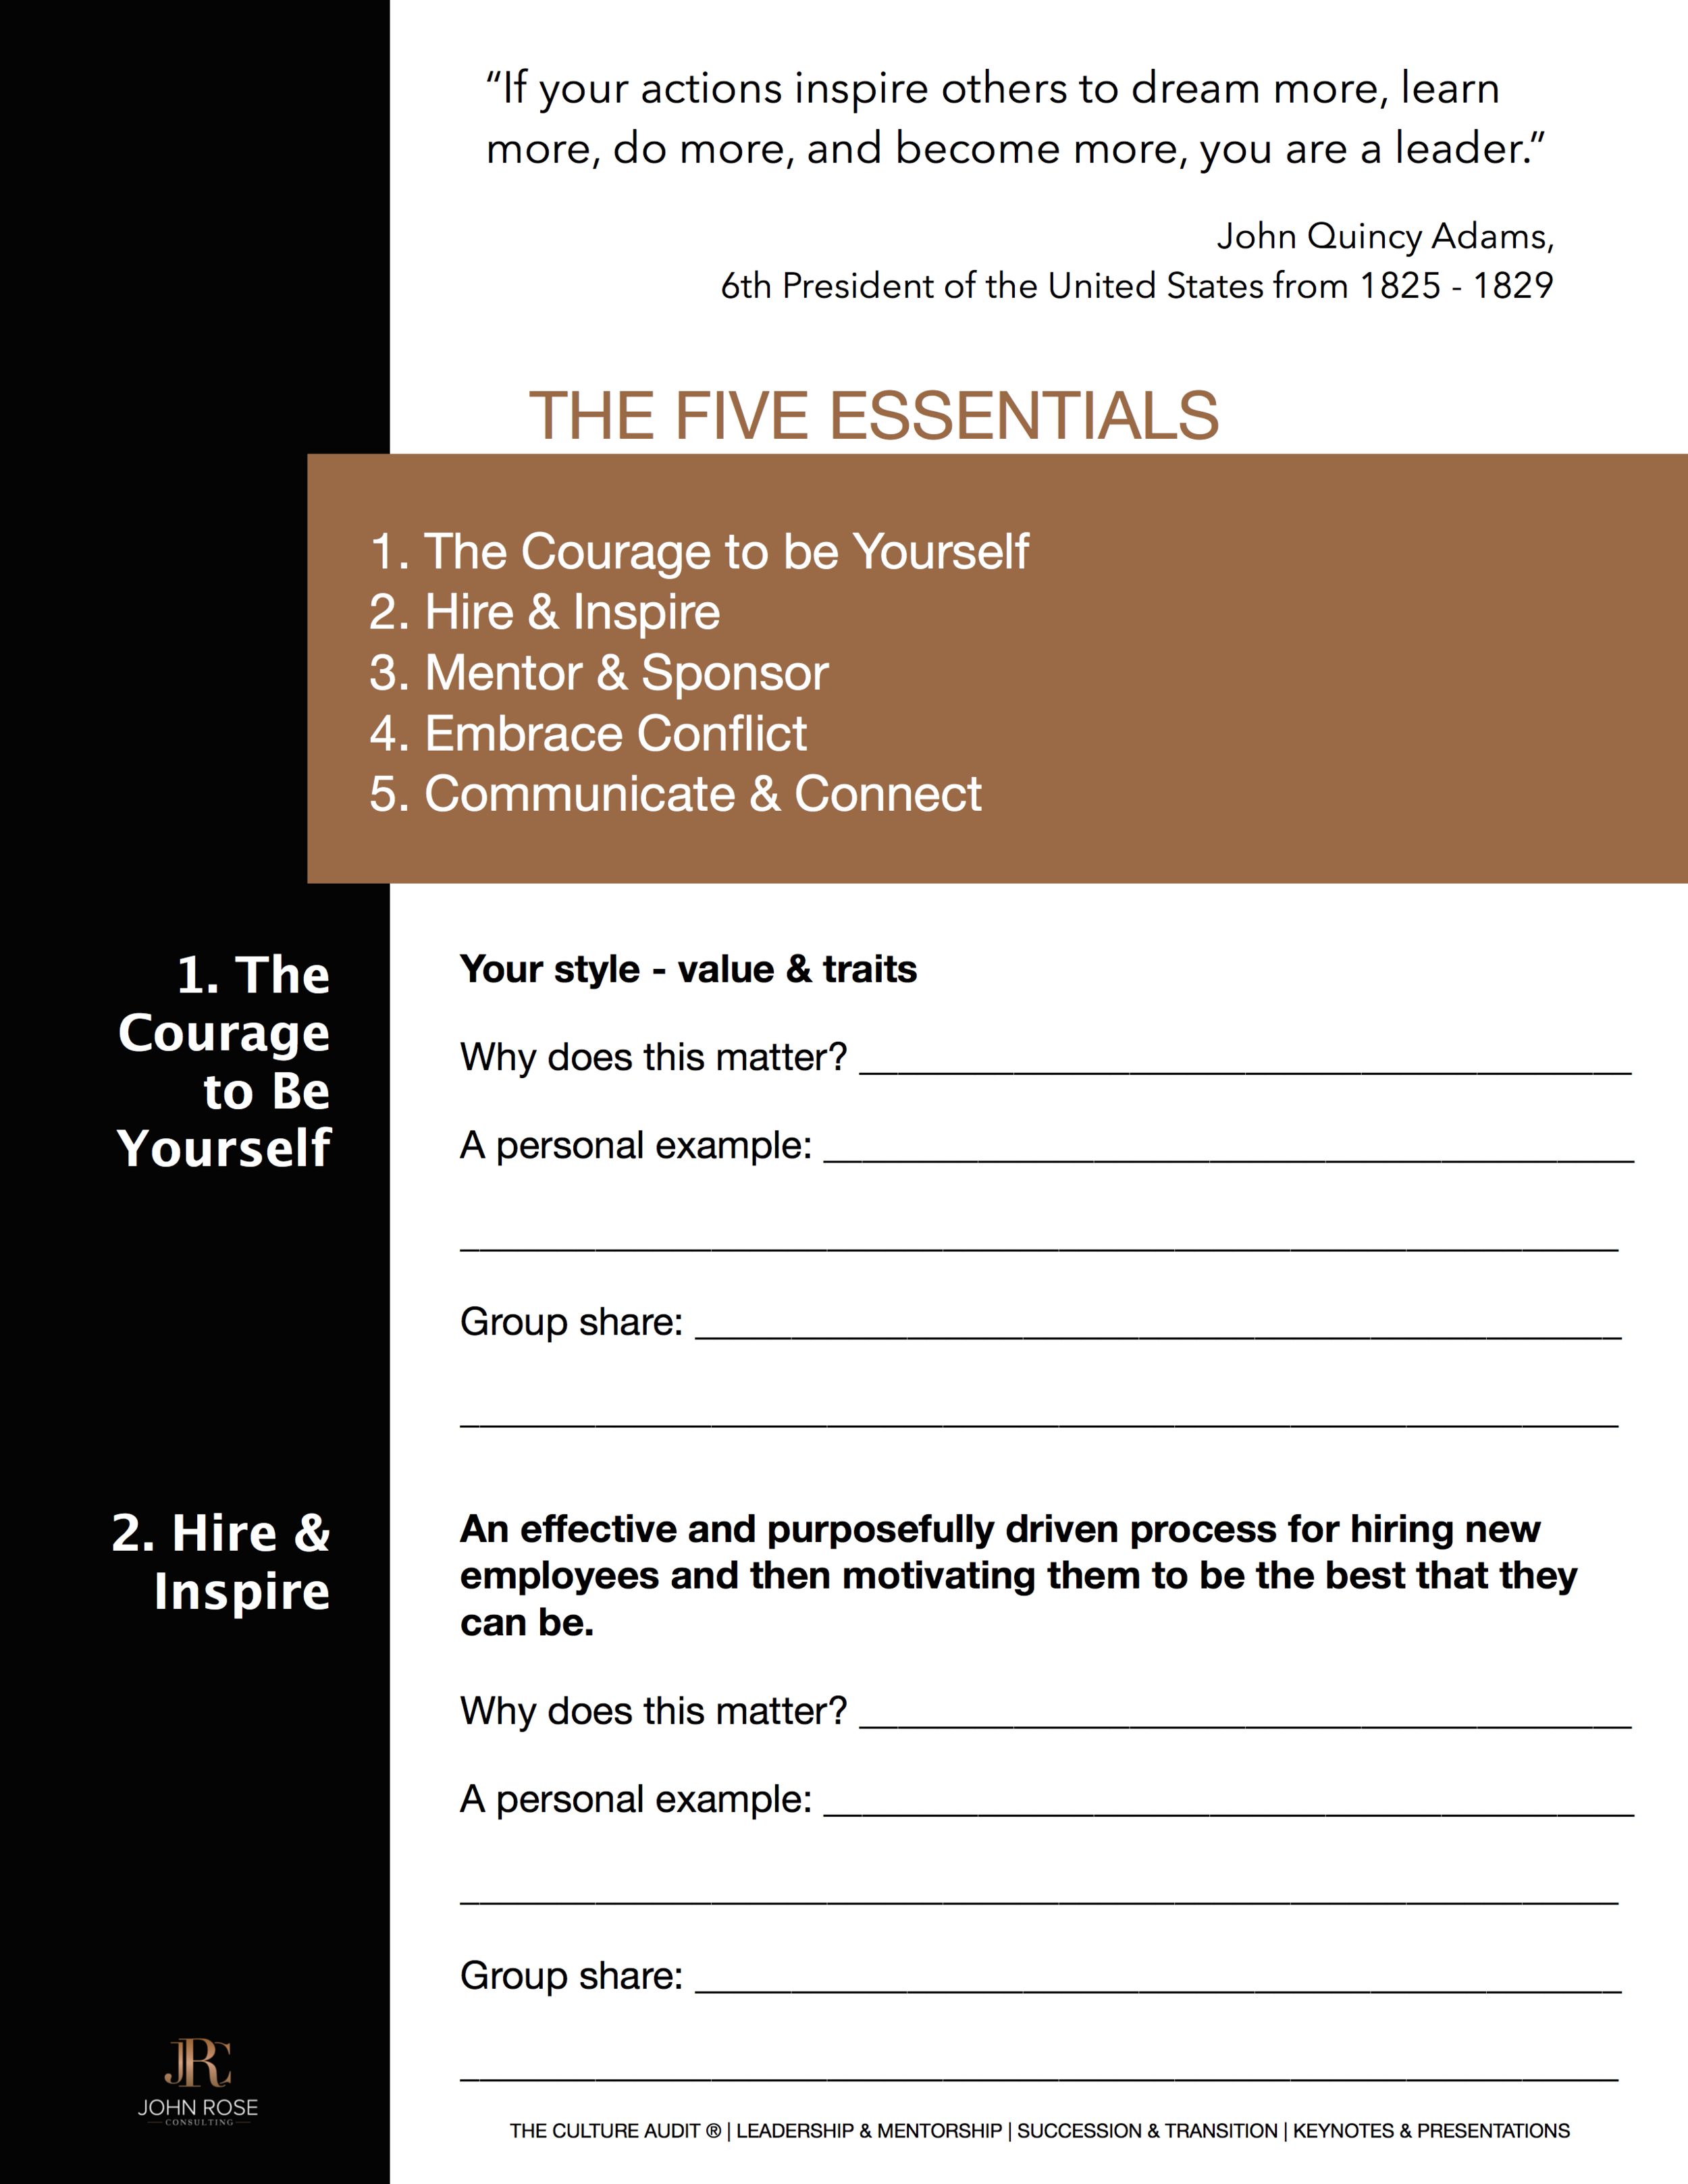 Five Essentials to Shape and Inspire Leadership Handout (Template) (dragged)2.png